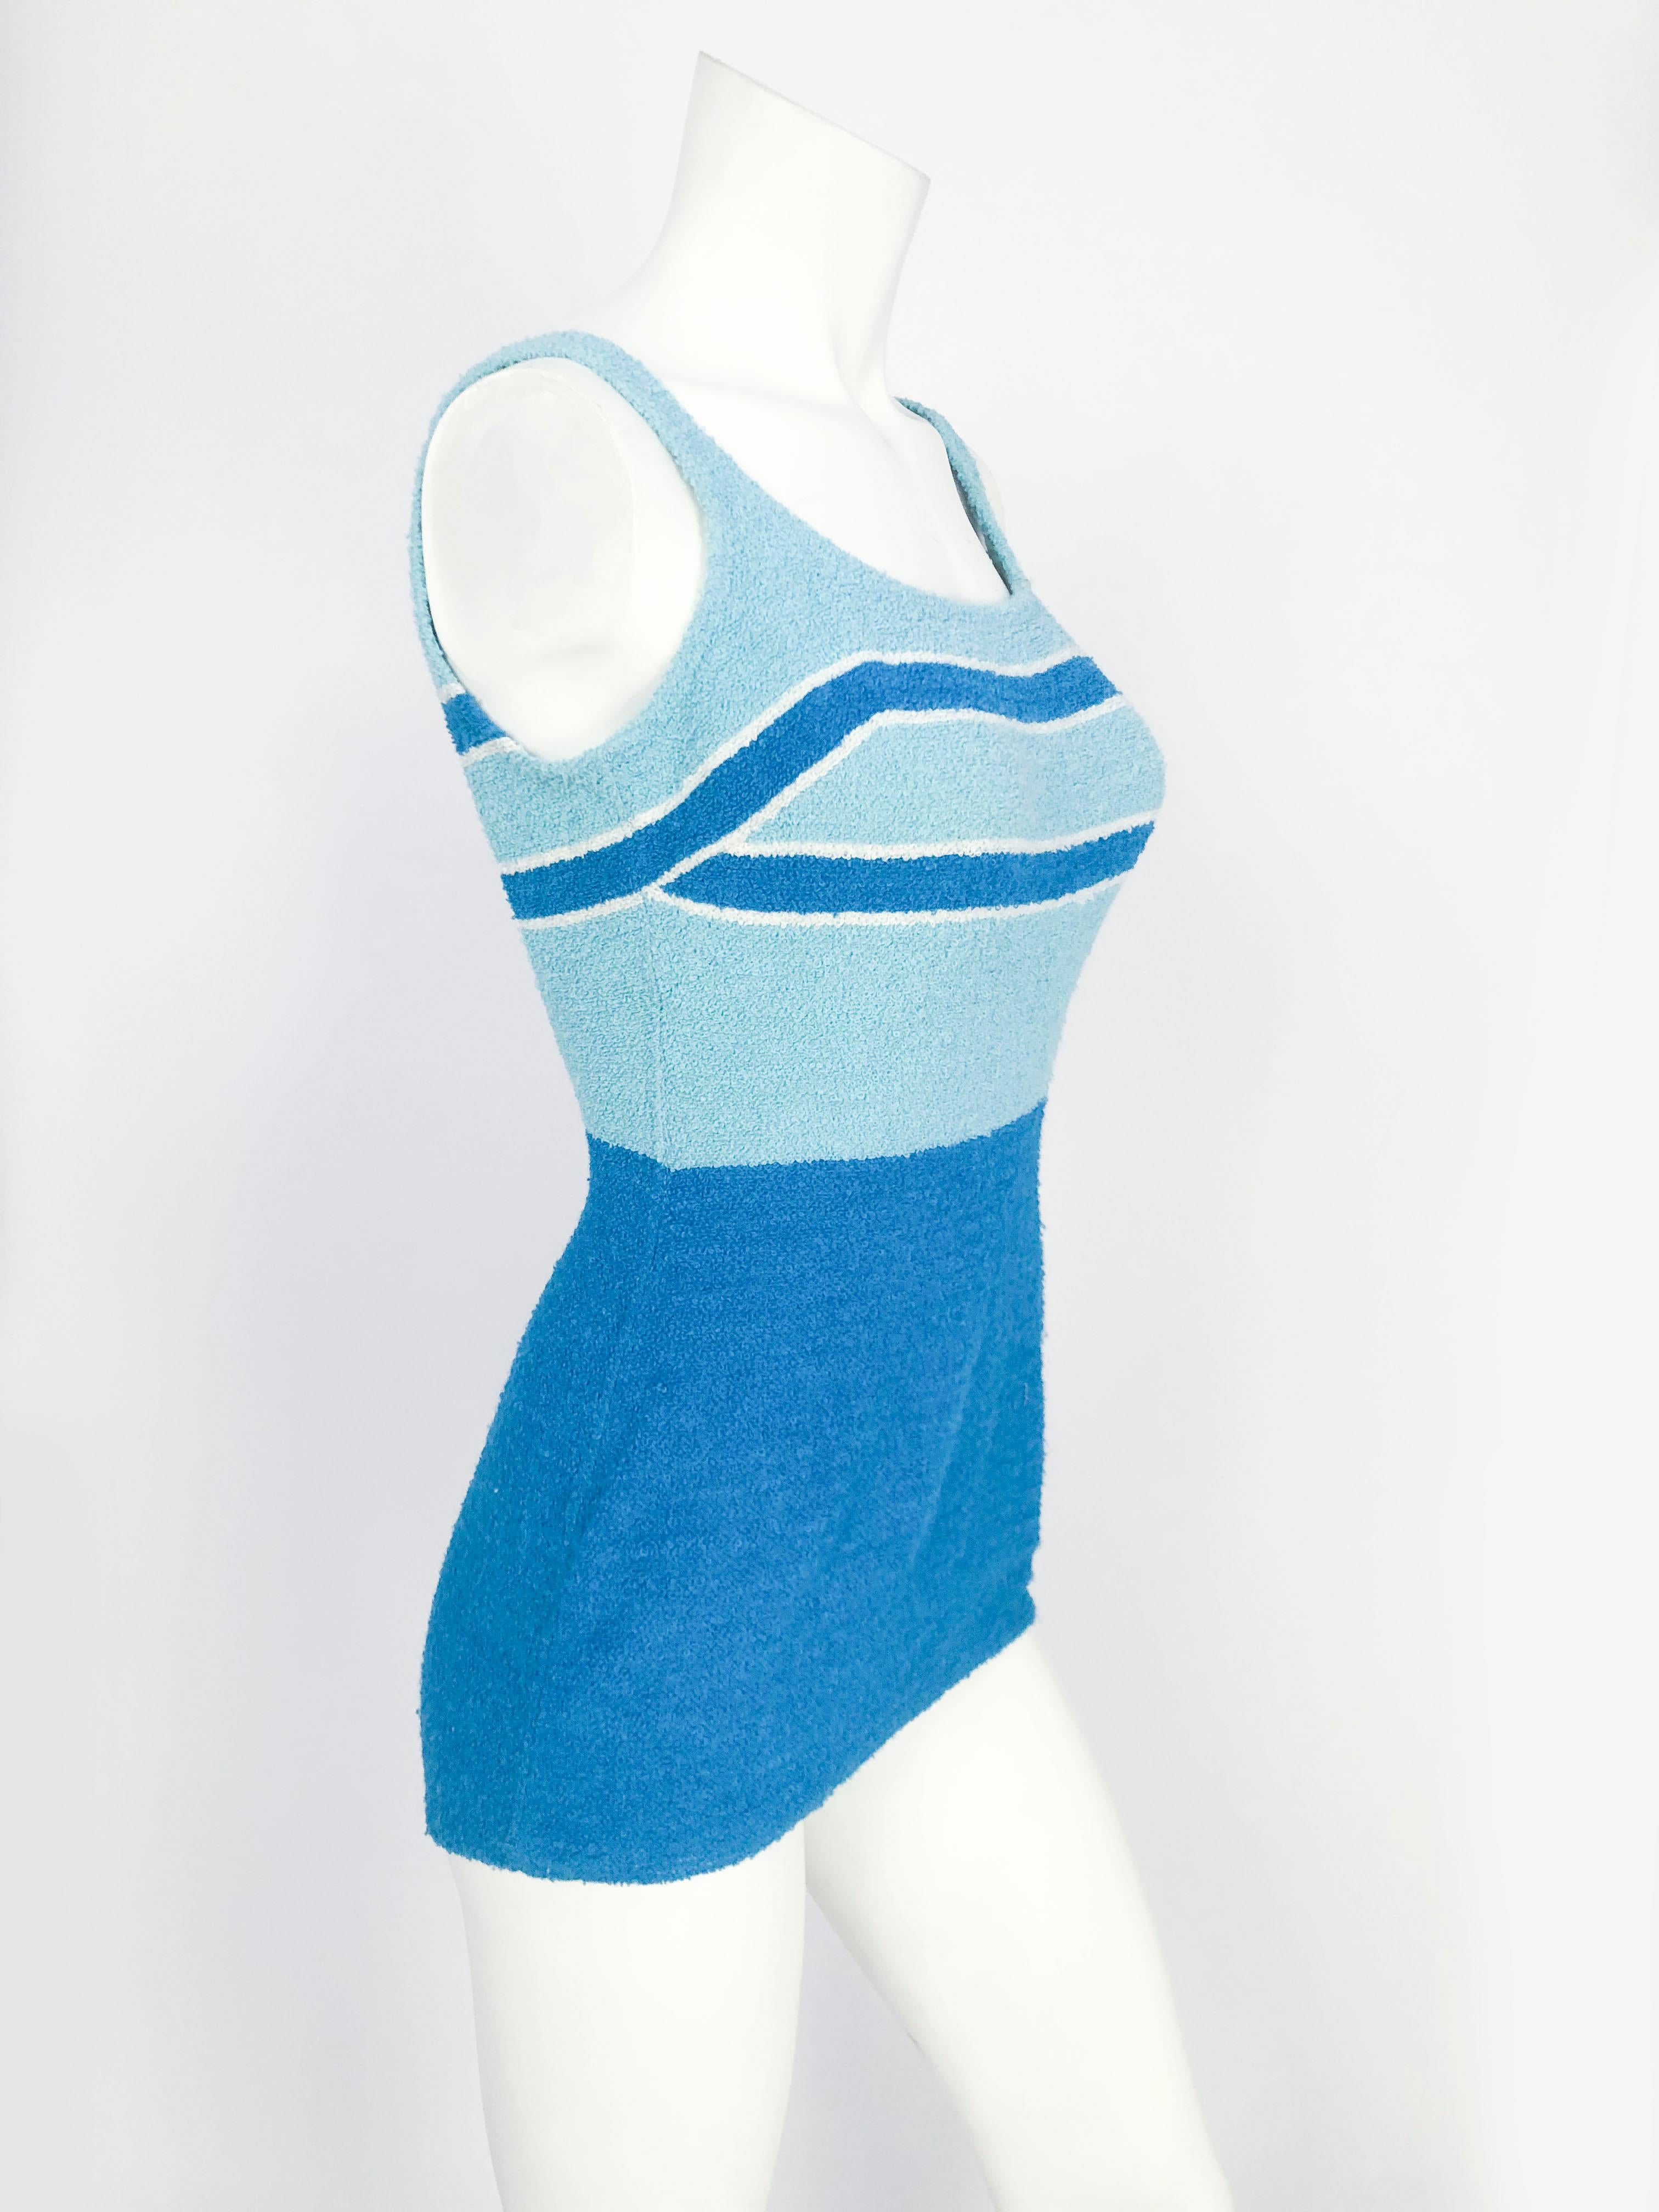 1950s Aqua and Light Blue Terry cloth Swimsuit with color blocking motif, built-in bra, and a backless structure.